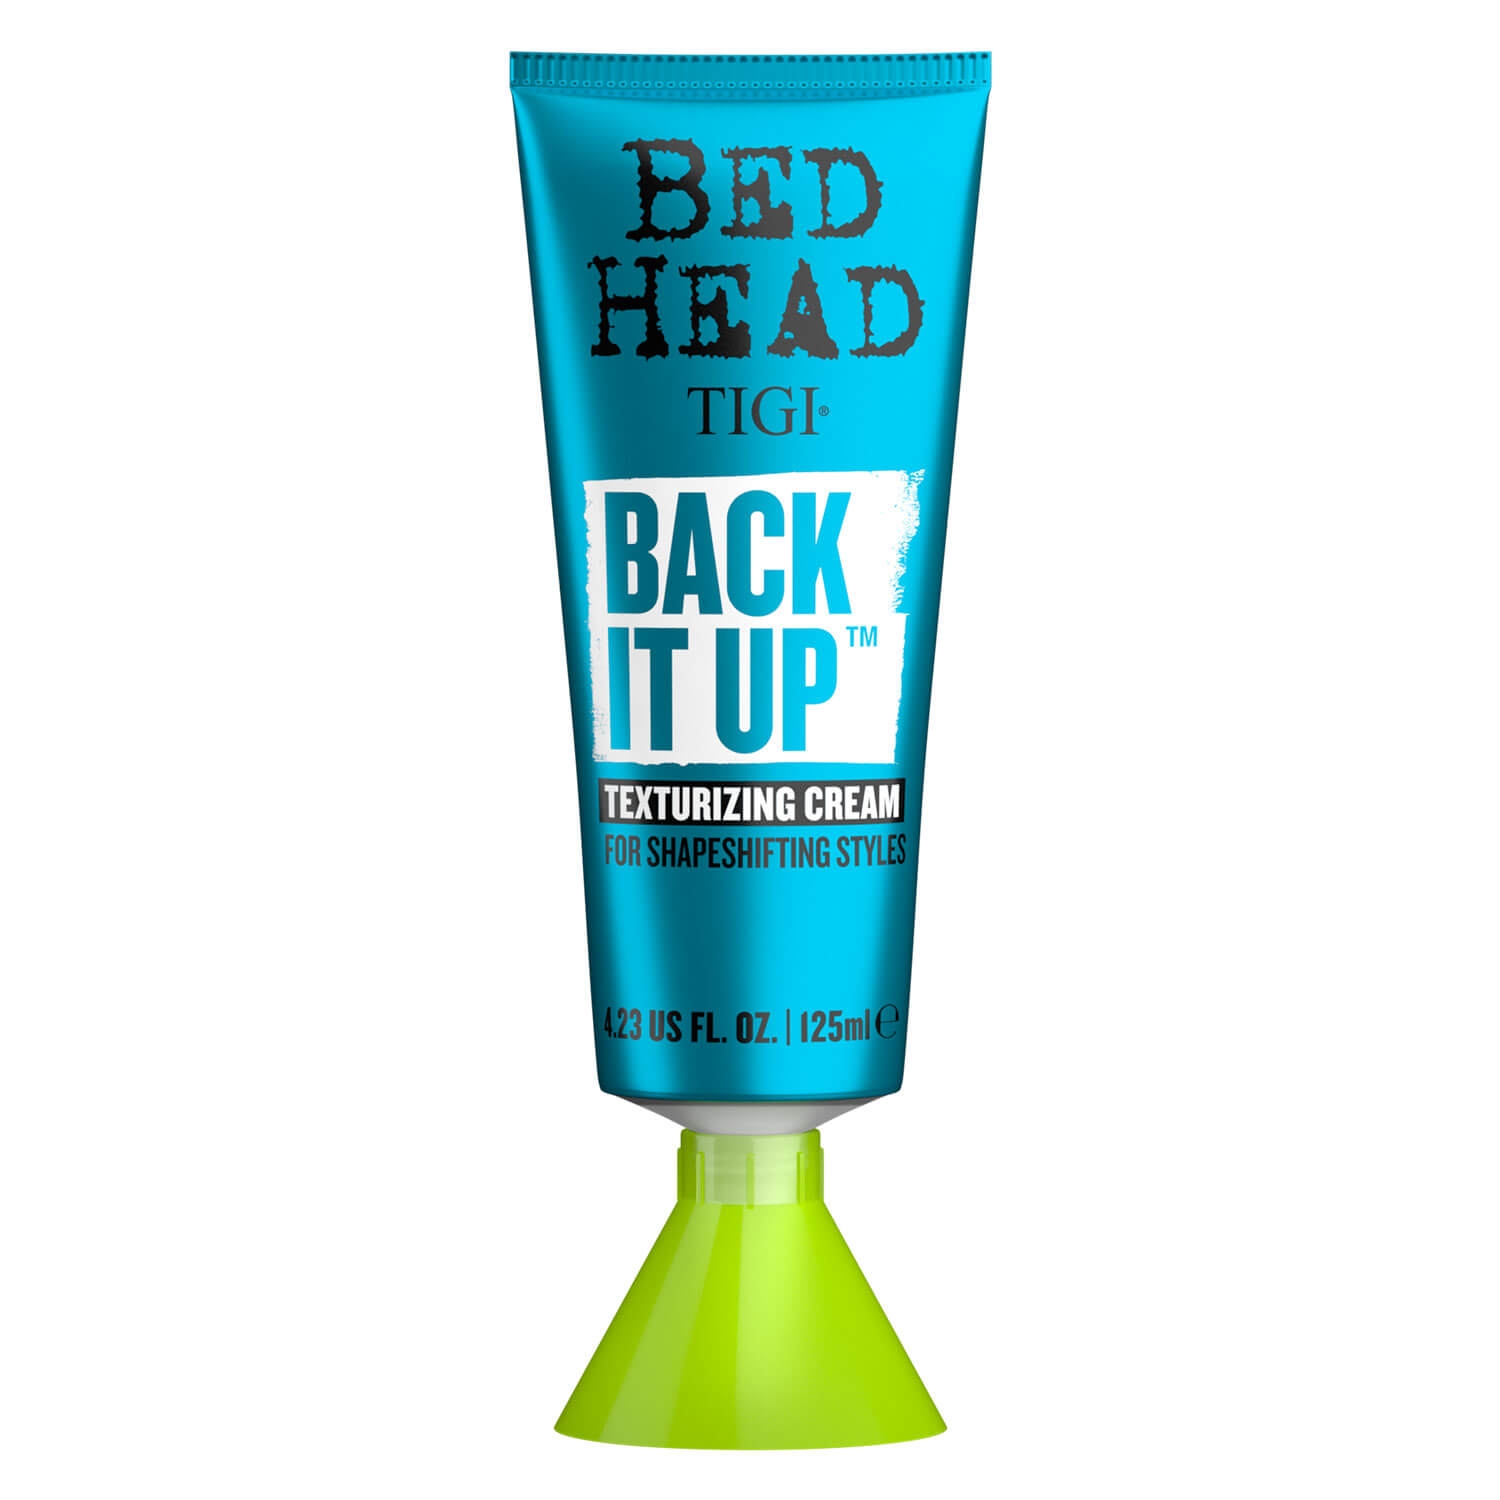 Product image from Bed Head - Back it Up Texturizing Cream